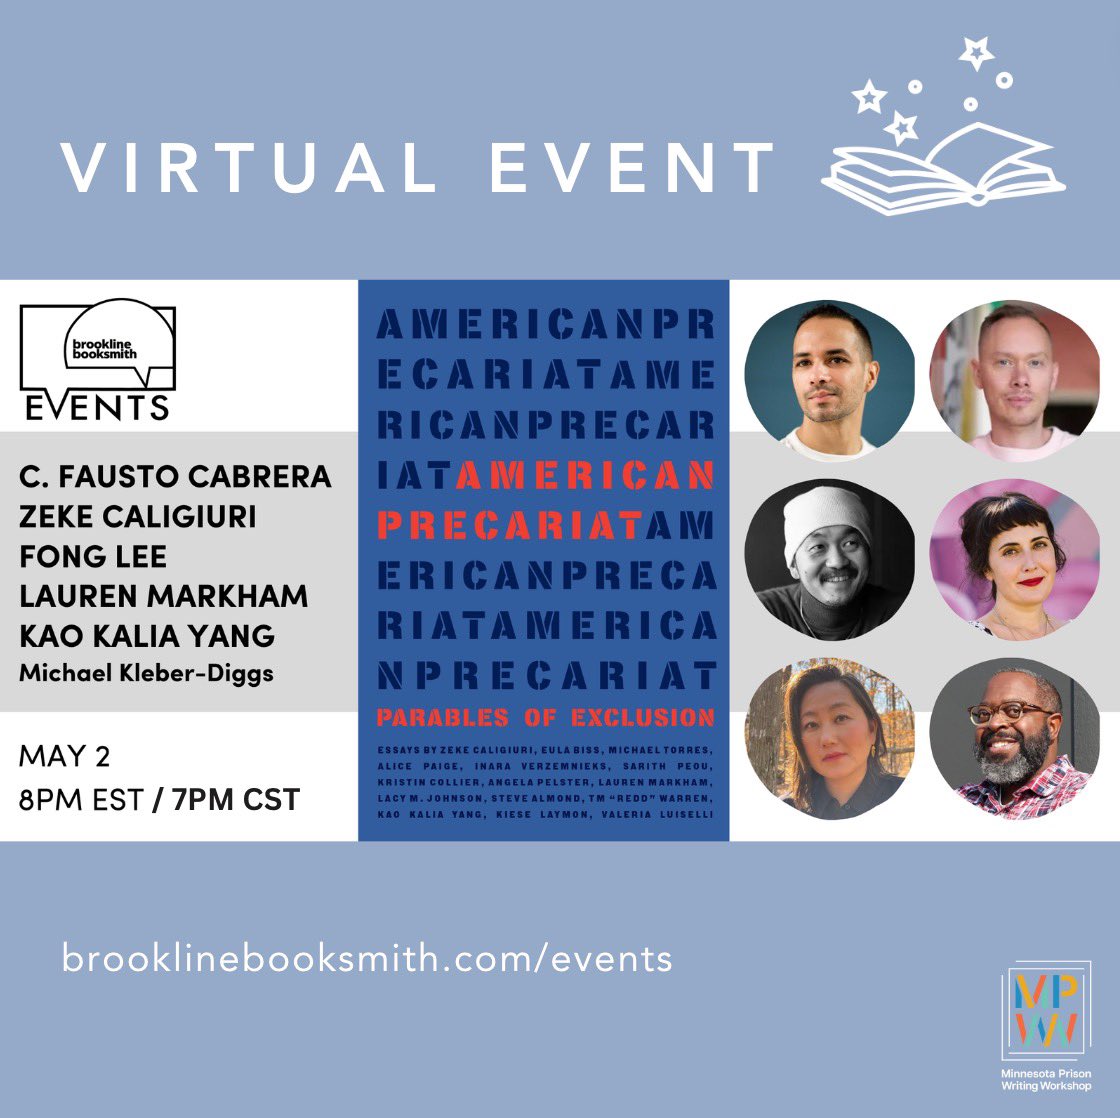 TOMORROW, Thursday, May 2nd at 8PM ET/7PM CT/5PM PT, please join us with @booksmithtweets to celebrate ✨AMERICAN PRECARIAT✨ @Coffee_House_ featuring writers @LaurenMarkham_ @kaokaliayang & editors C. Fausto, Fong & Zeke, hosted by @MKDorDiggsy. To RSVP: brooklinebooksmith.com/events